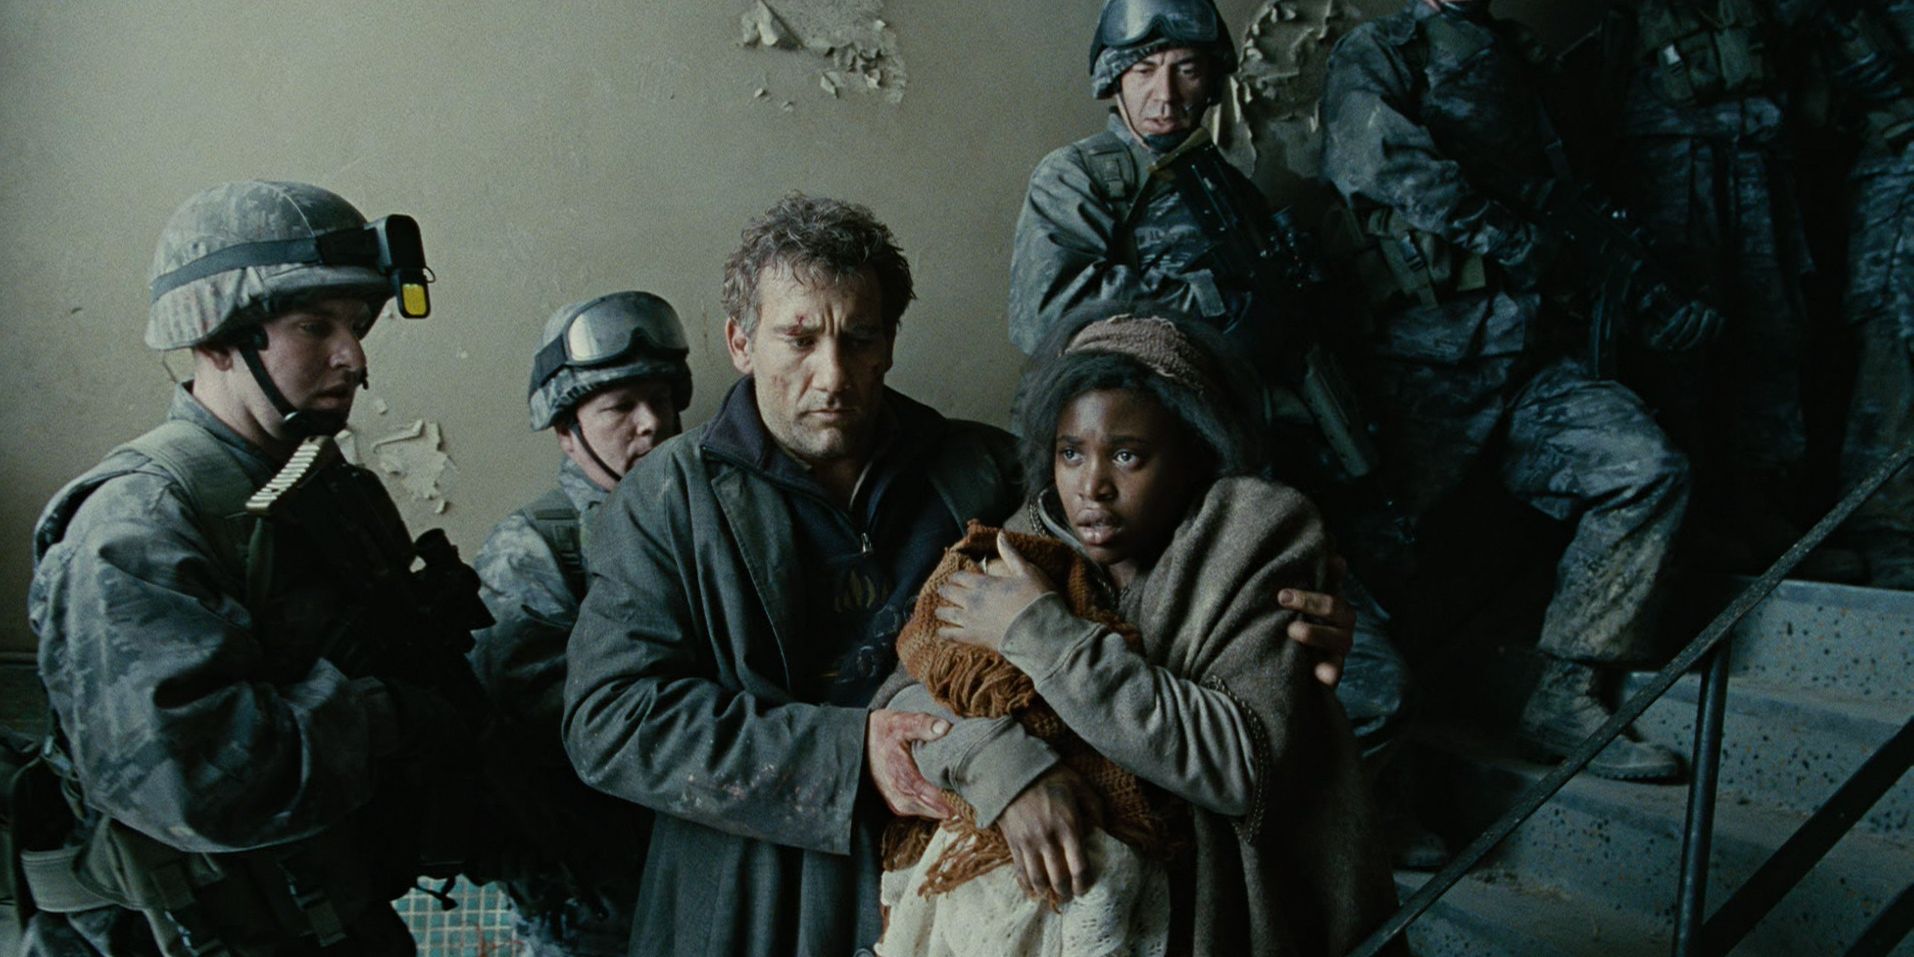 A vagrant struggles for hope in a Children of Men dystopia